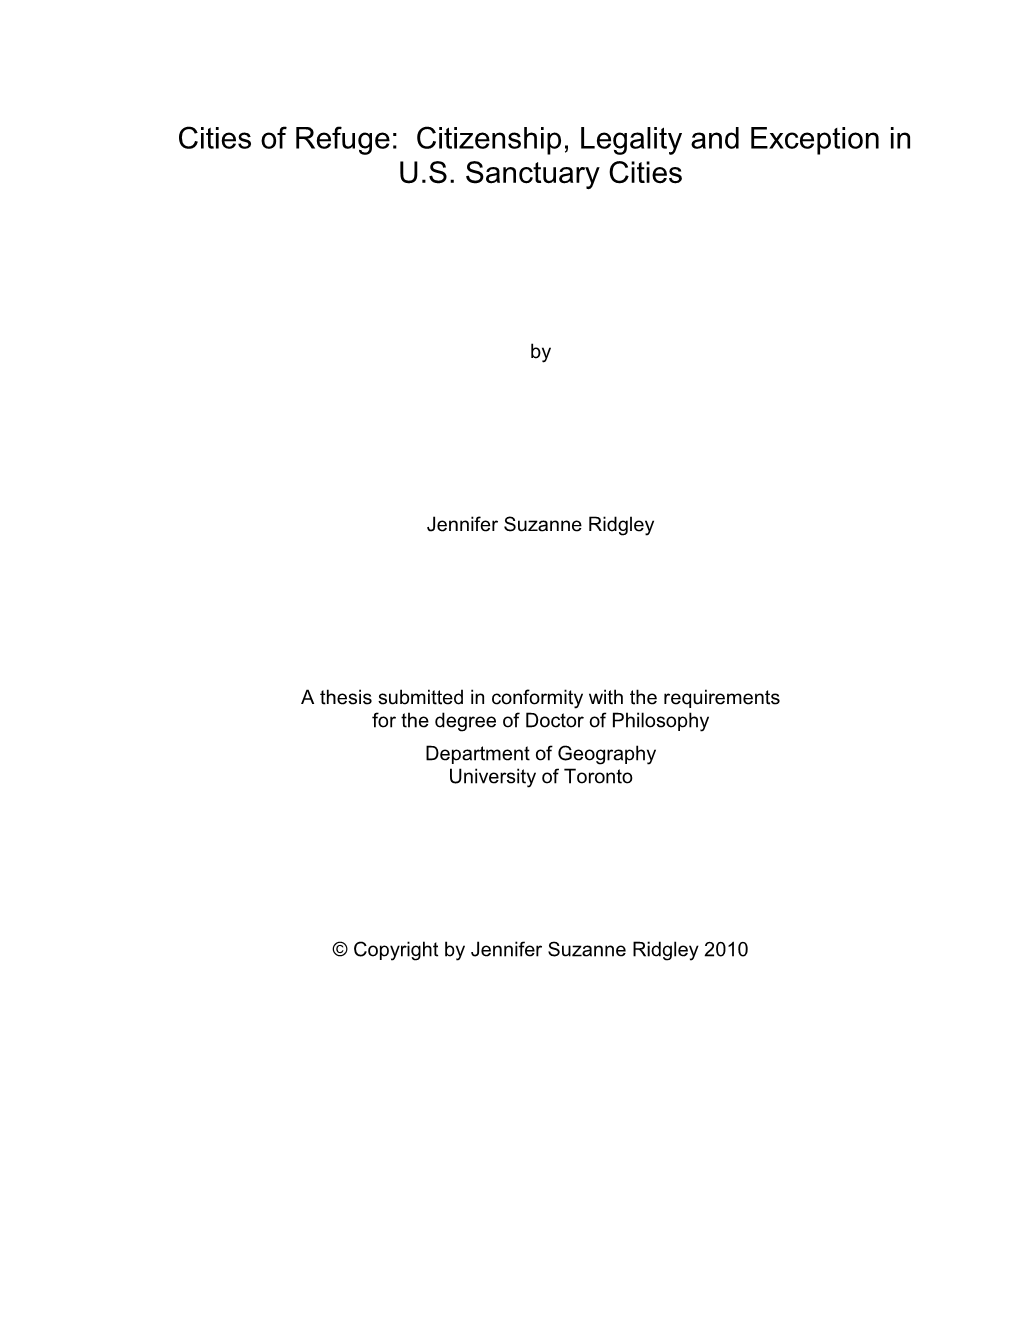 Cities of Refuge: Citizenship, Legality and Exception in US Sanctuary Cities